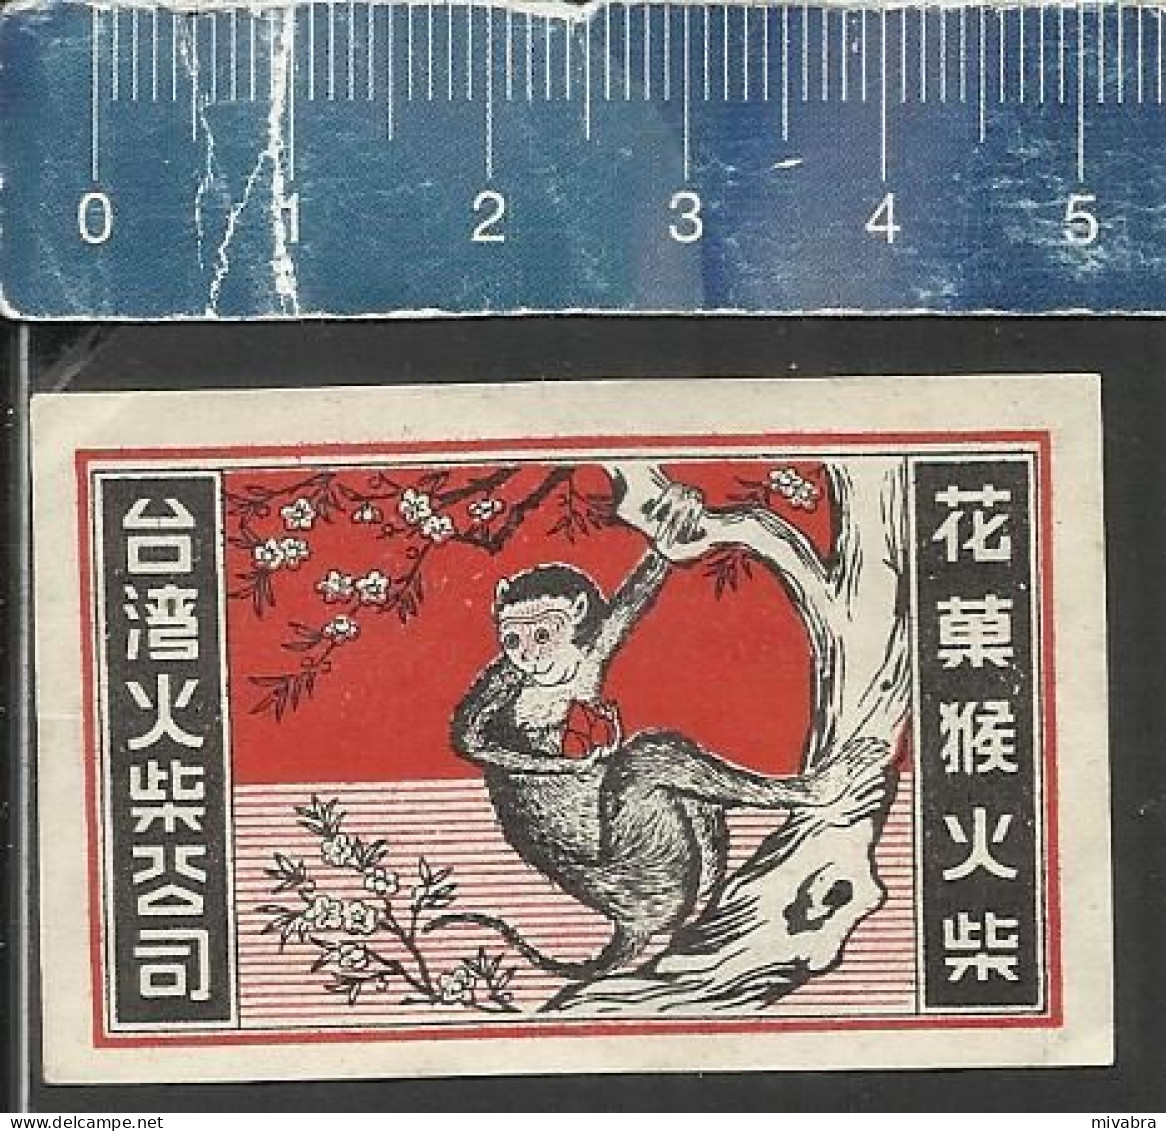 MONKEY CLIMBING A TREE -  OLD VINTAGE MATCHBOX LABEL  MADE IN JAPAN - Boites D'allumettes - Etiquettes